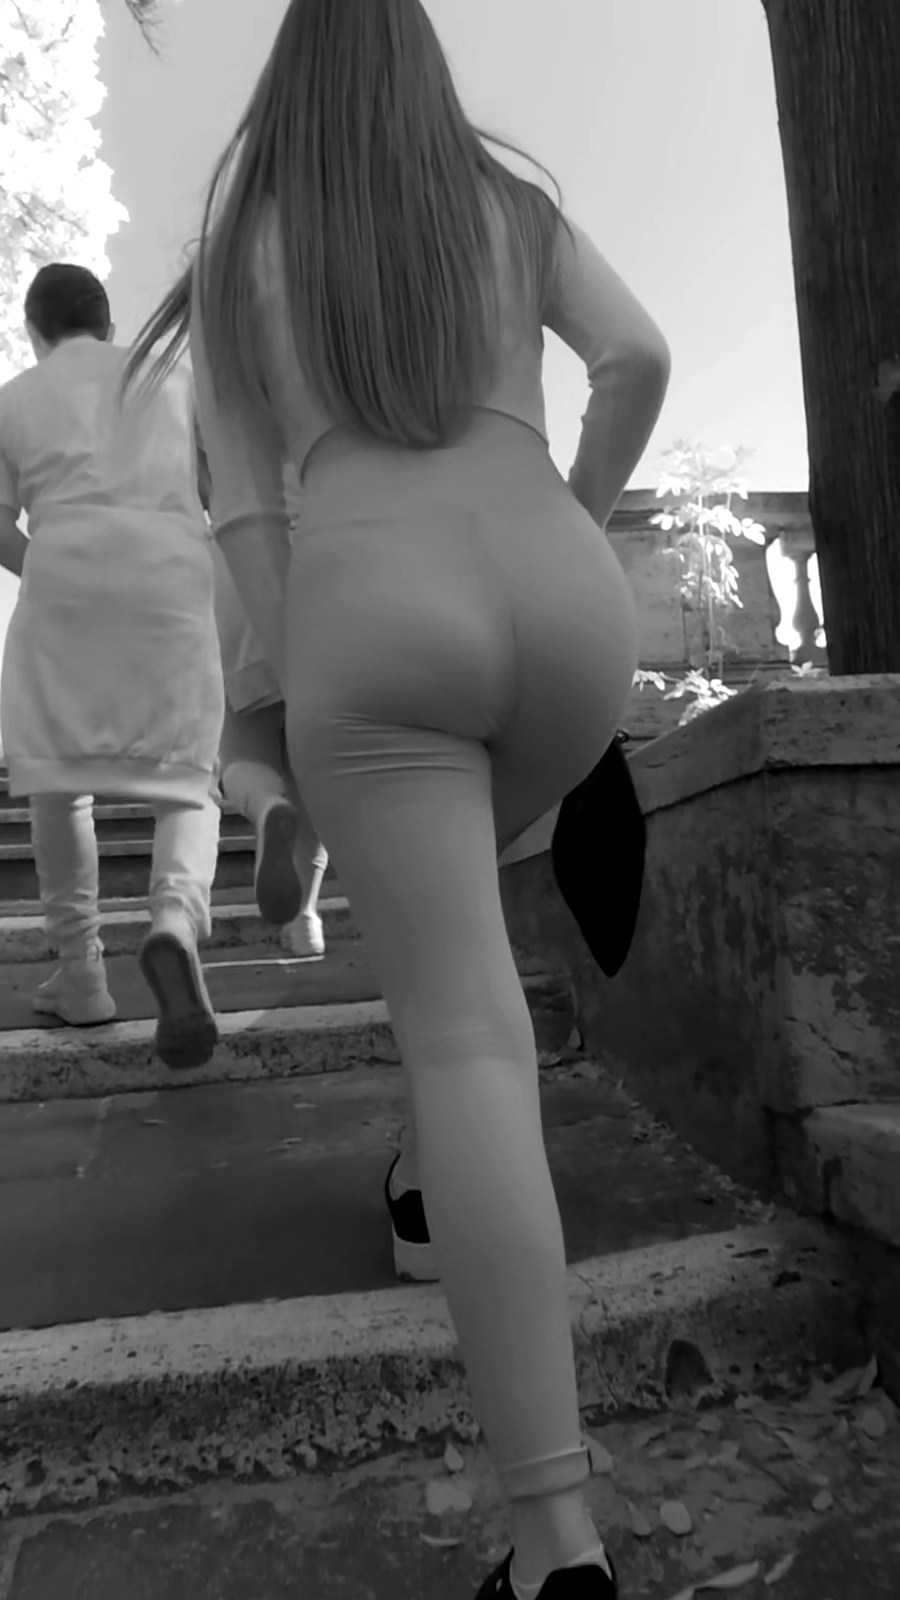 Cute Slim TEEN With BIG ASS In White Spandex With Visible Panty Lines - Candid Teens - Creepshots - Candid Voyeur Girls - Candid Ass Girls picture